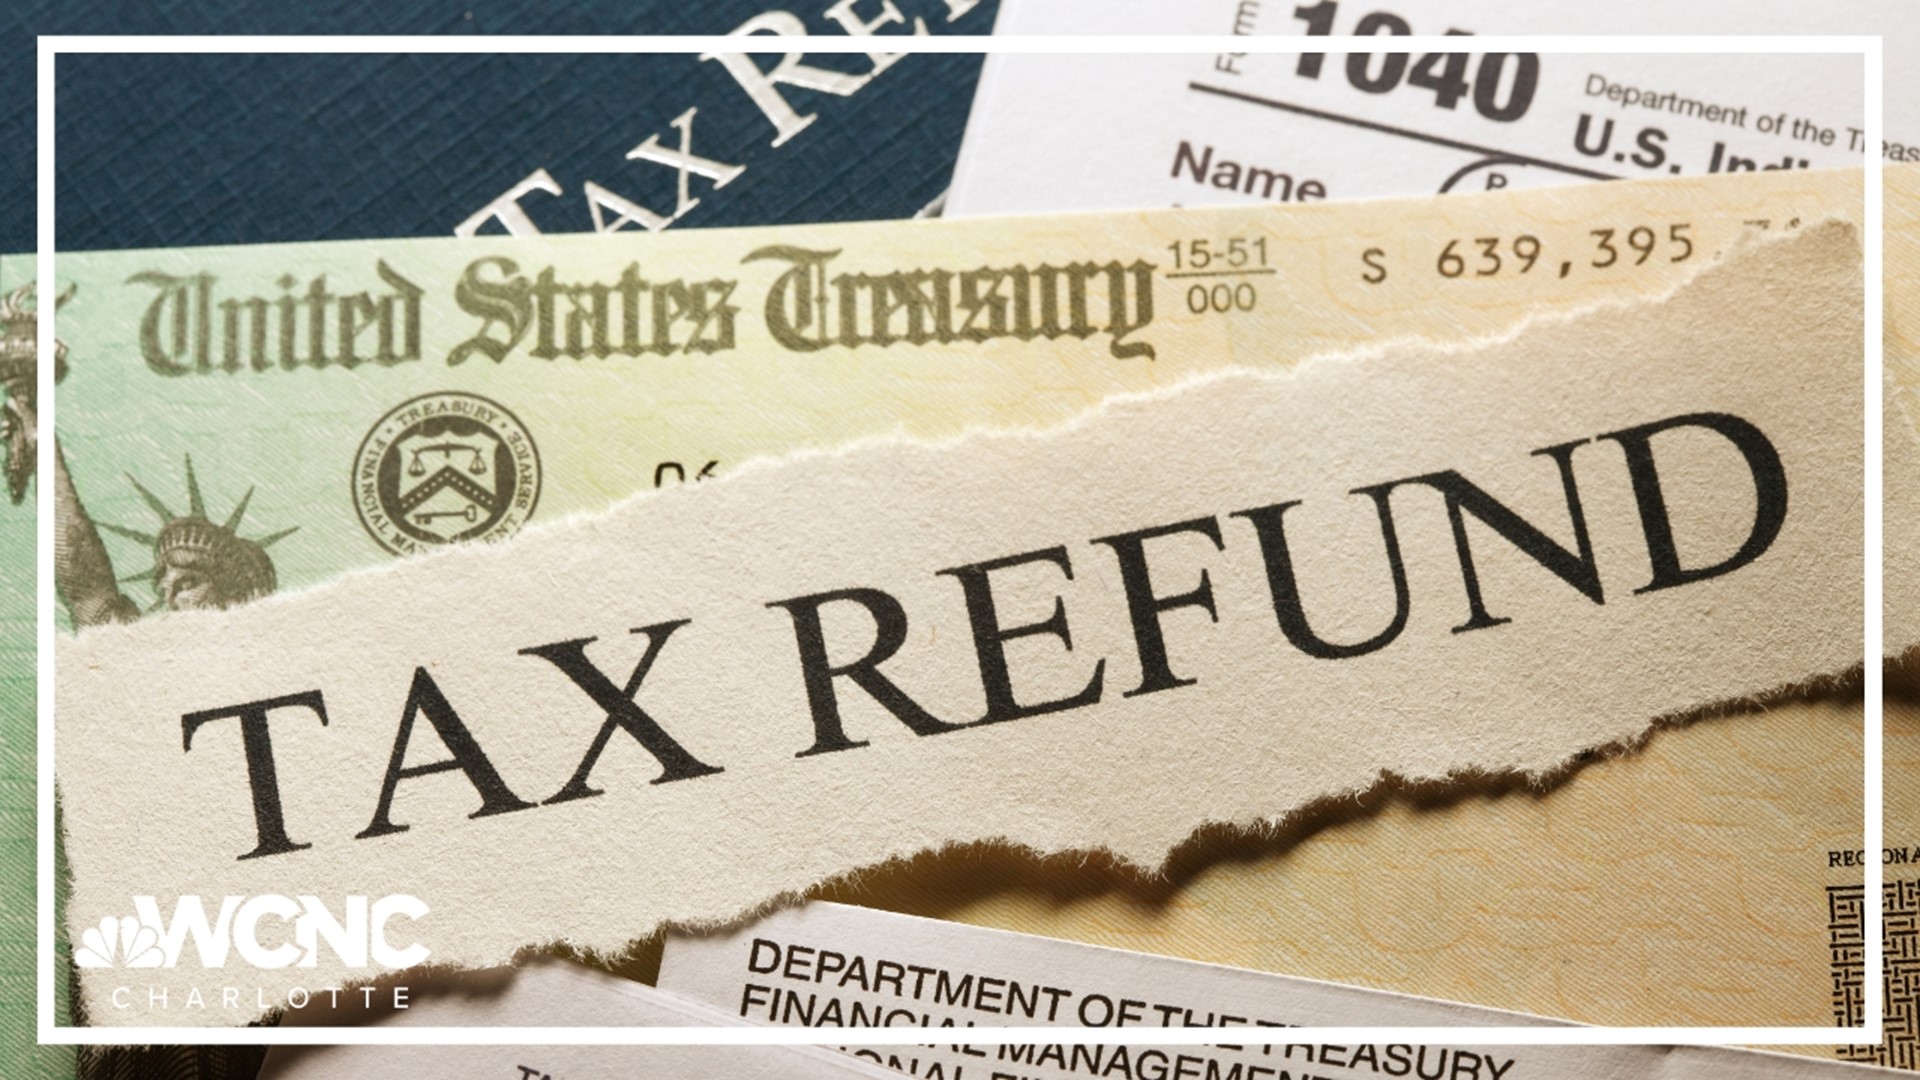 The most recent numbers show a little more than 65 million tax refunds have been processed as of the beginning of this month.